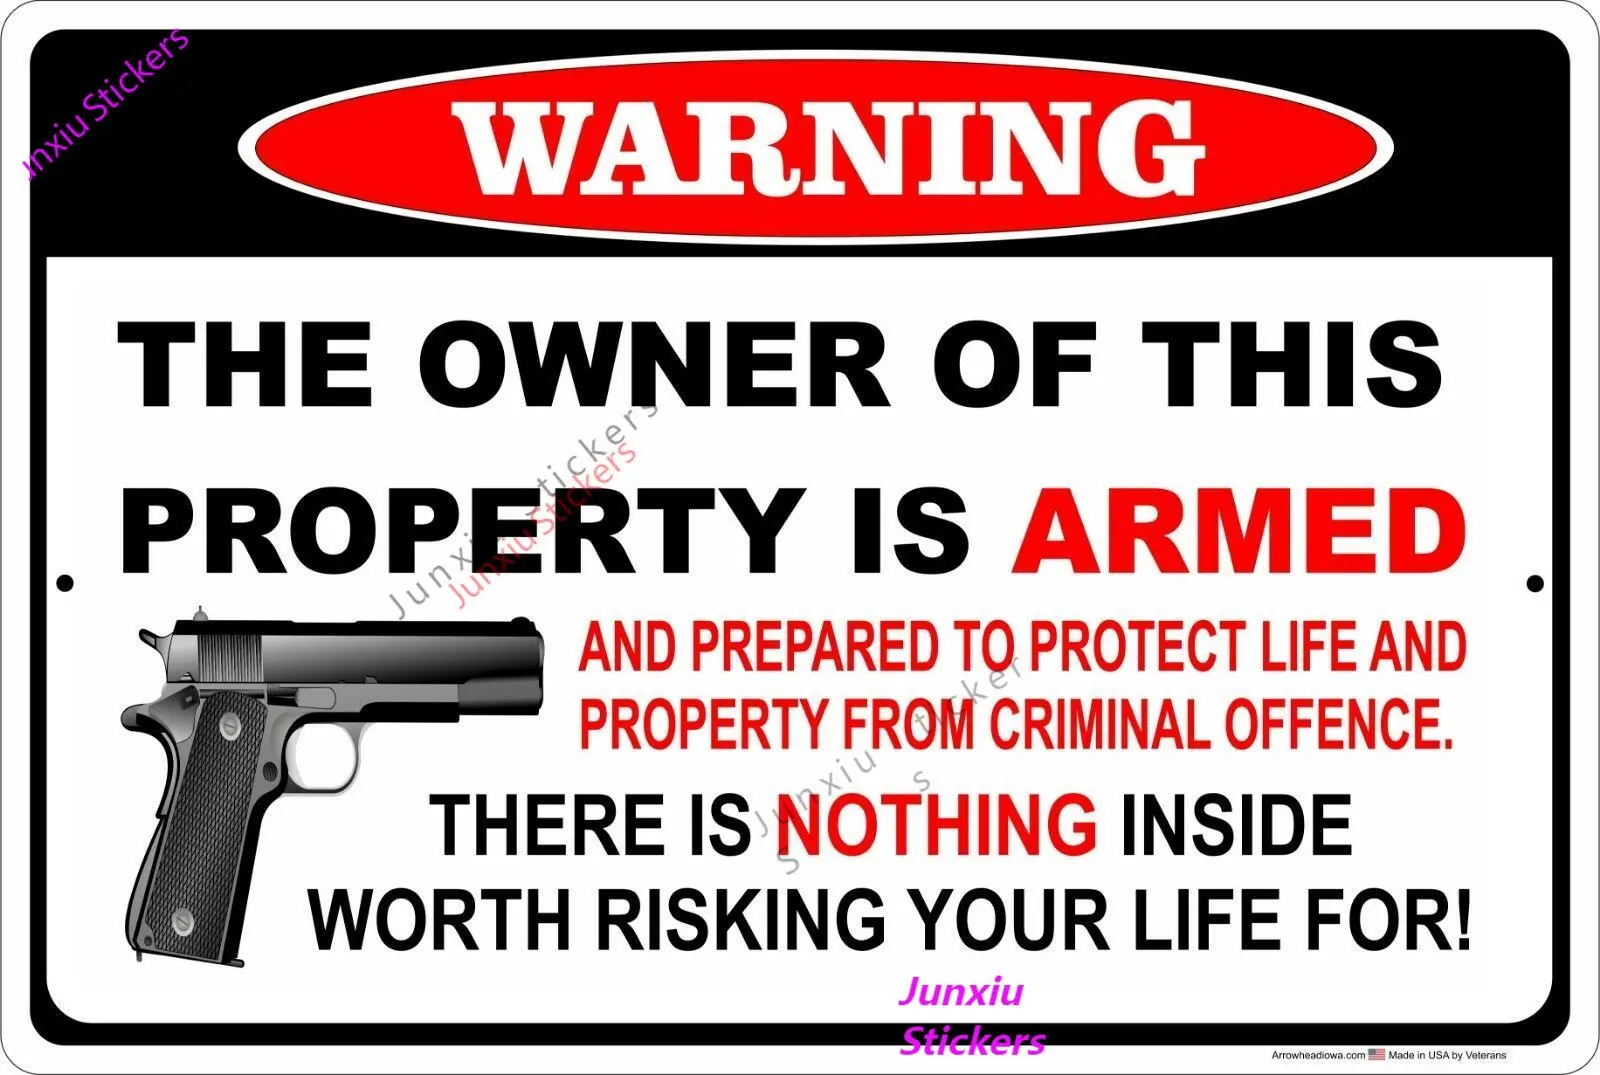 

Warning The Owner of This Property Is Armed and Prepared To Protect Metal Sign Car Decal Car Accessories Car Sticker KK10cm